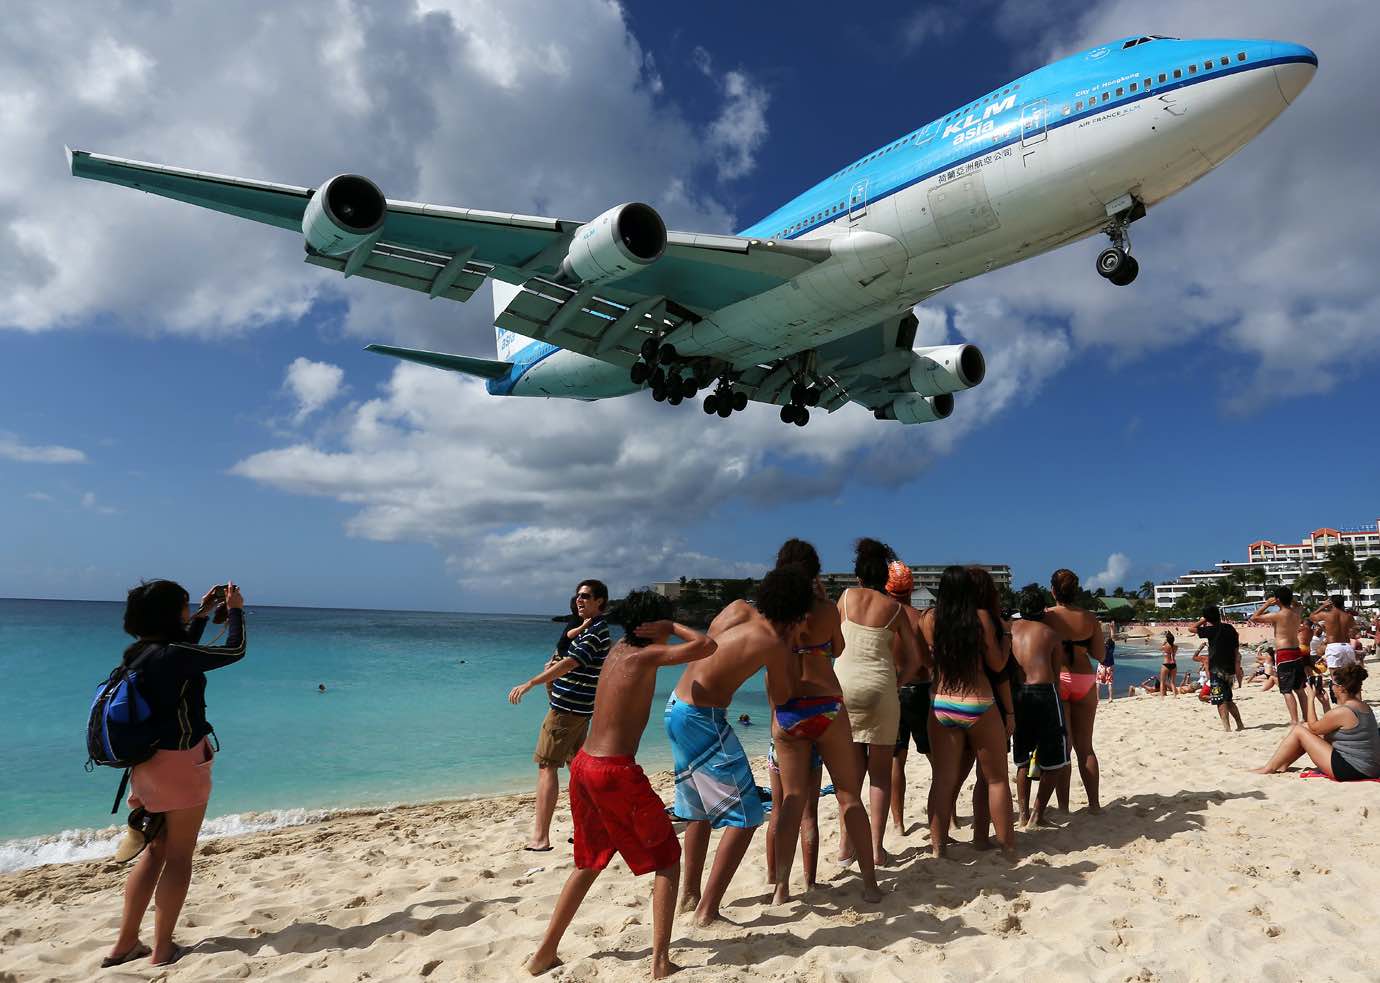 Things to do in St Marten St Maarten include watching KLM_Asia_Boeing_747-400_landing_at_SXM